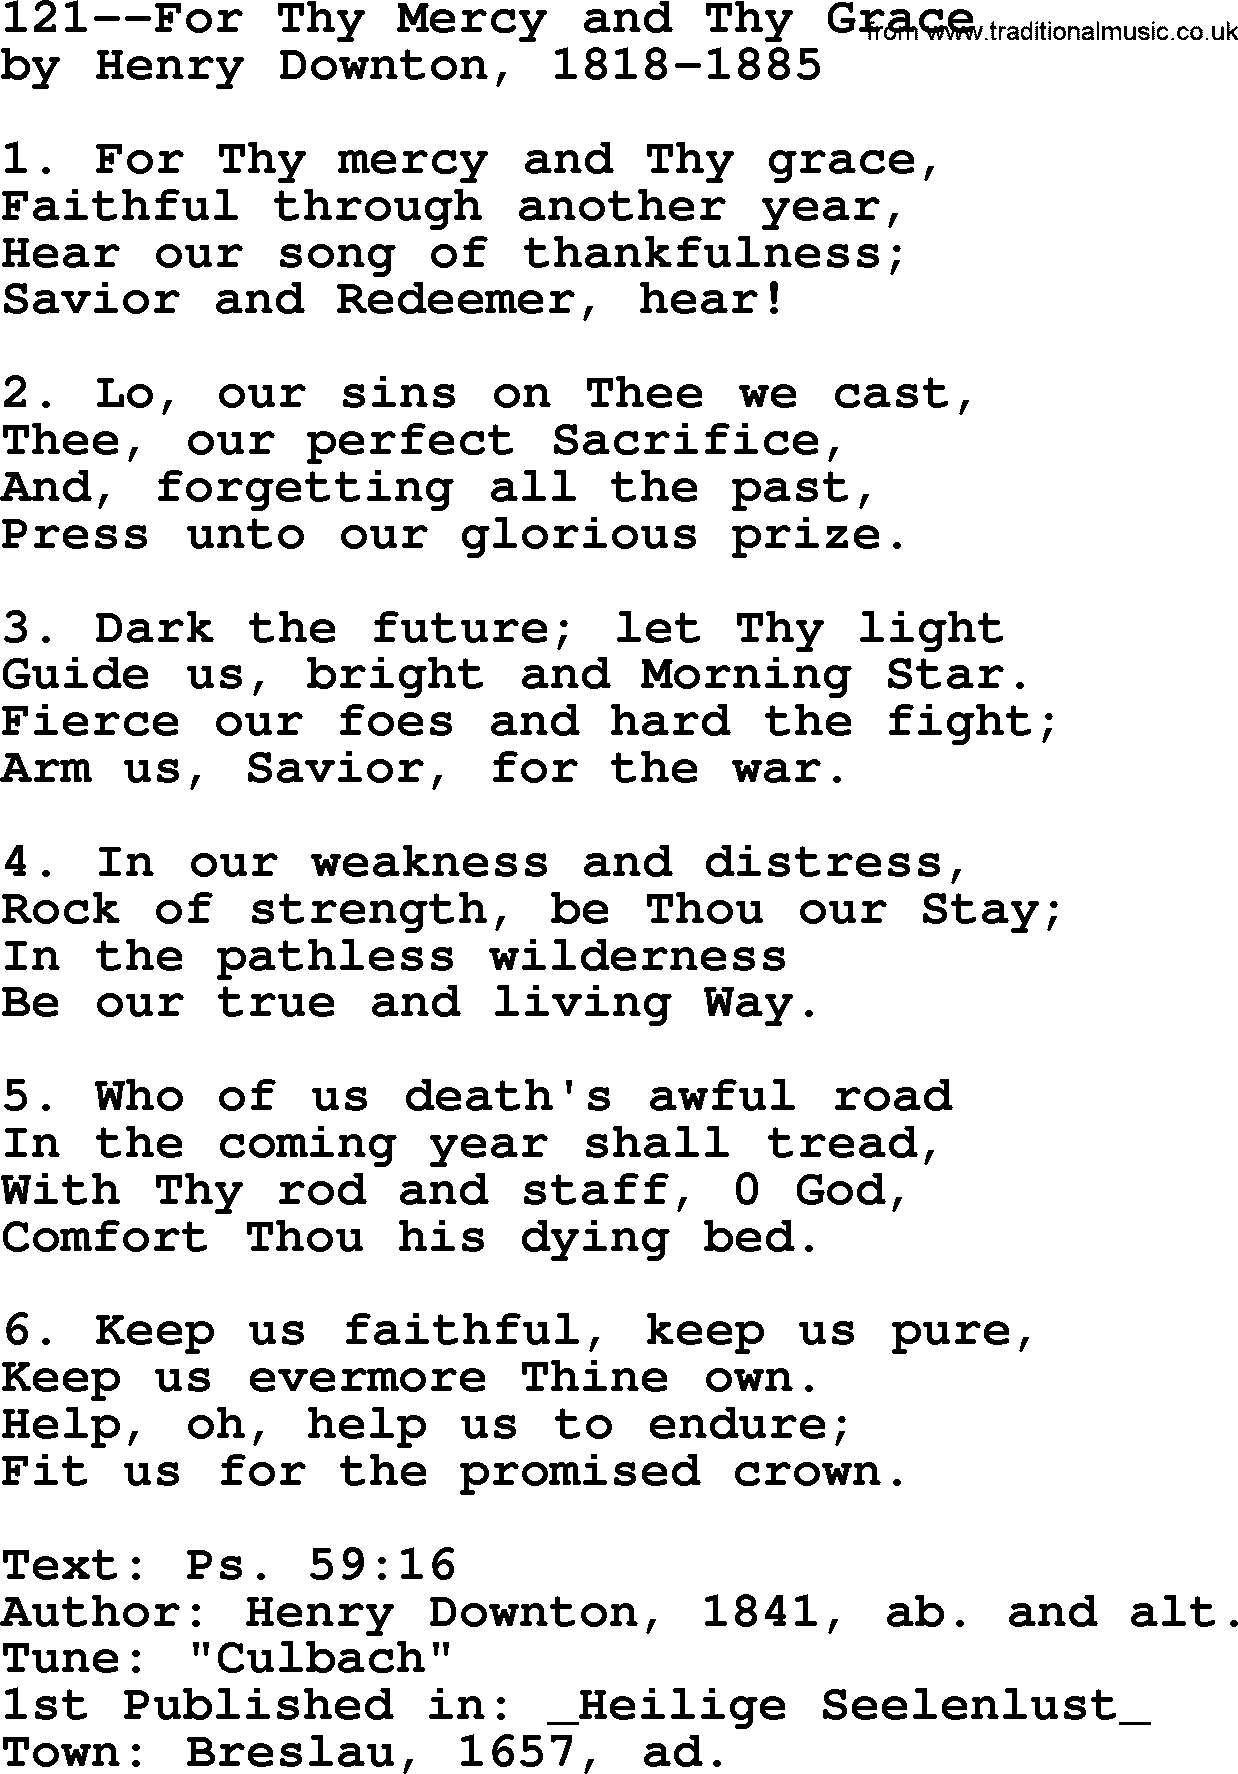 Lutheran Hymn: 121--For Thy Mercy and Thy Grace.txt lyrics with PDF